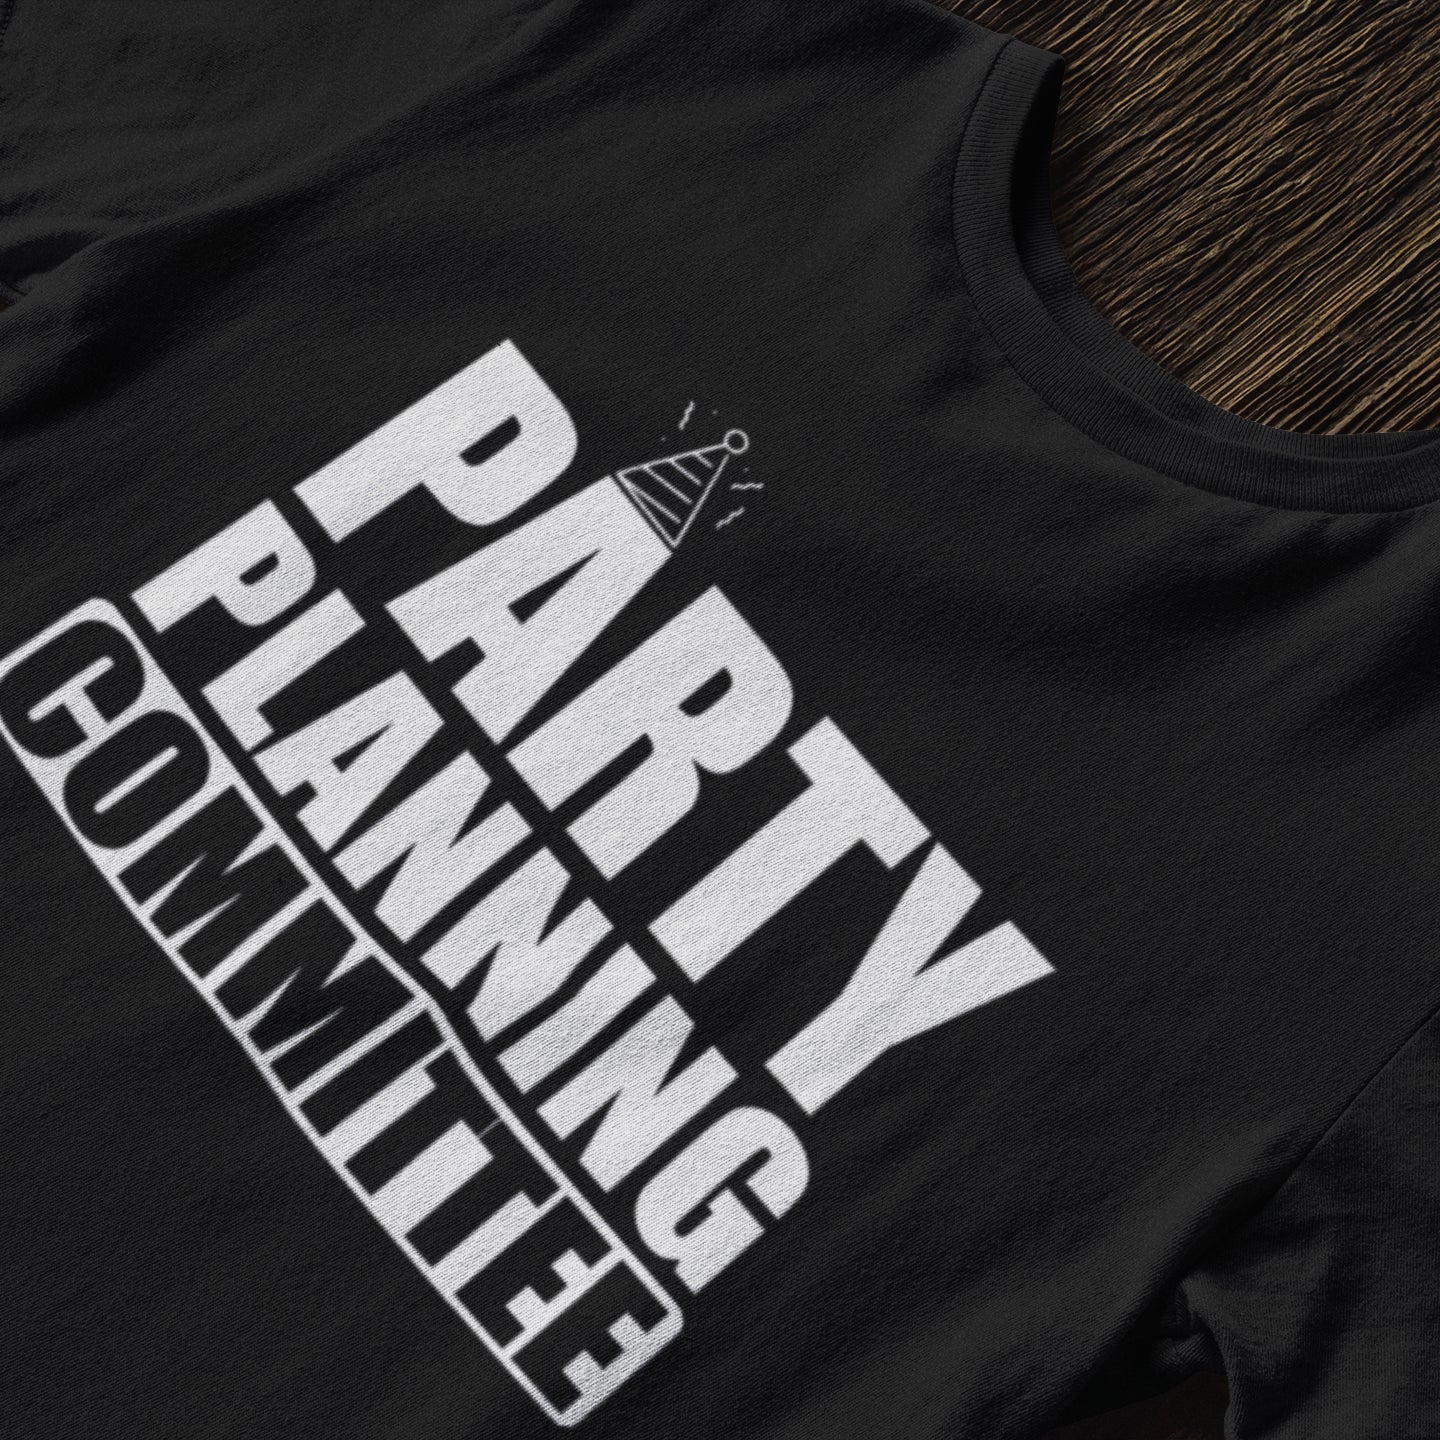 Party Planning Committee The Office - T-Shirt